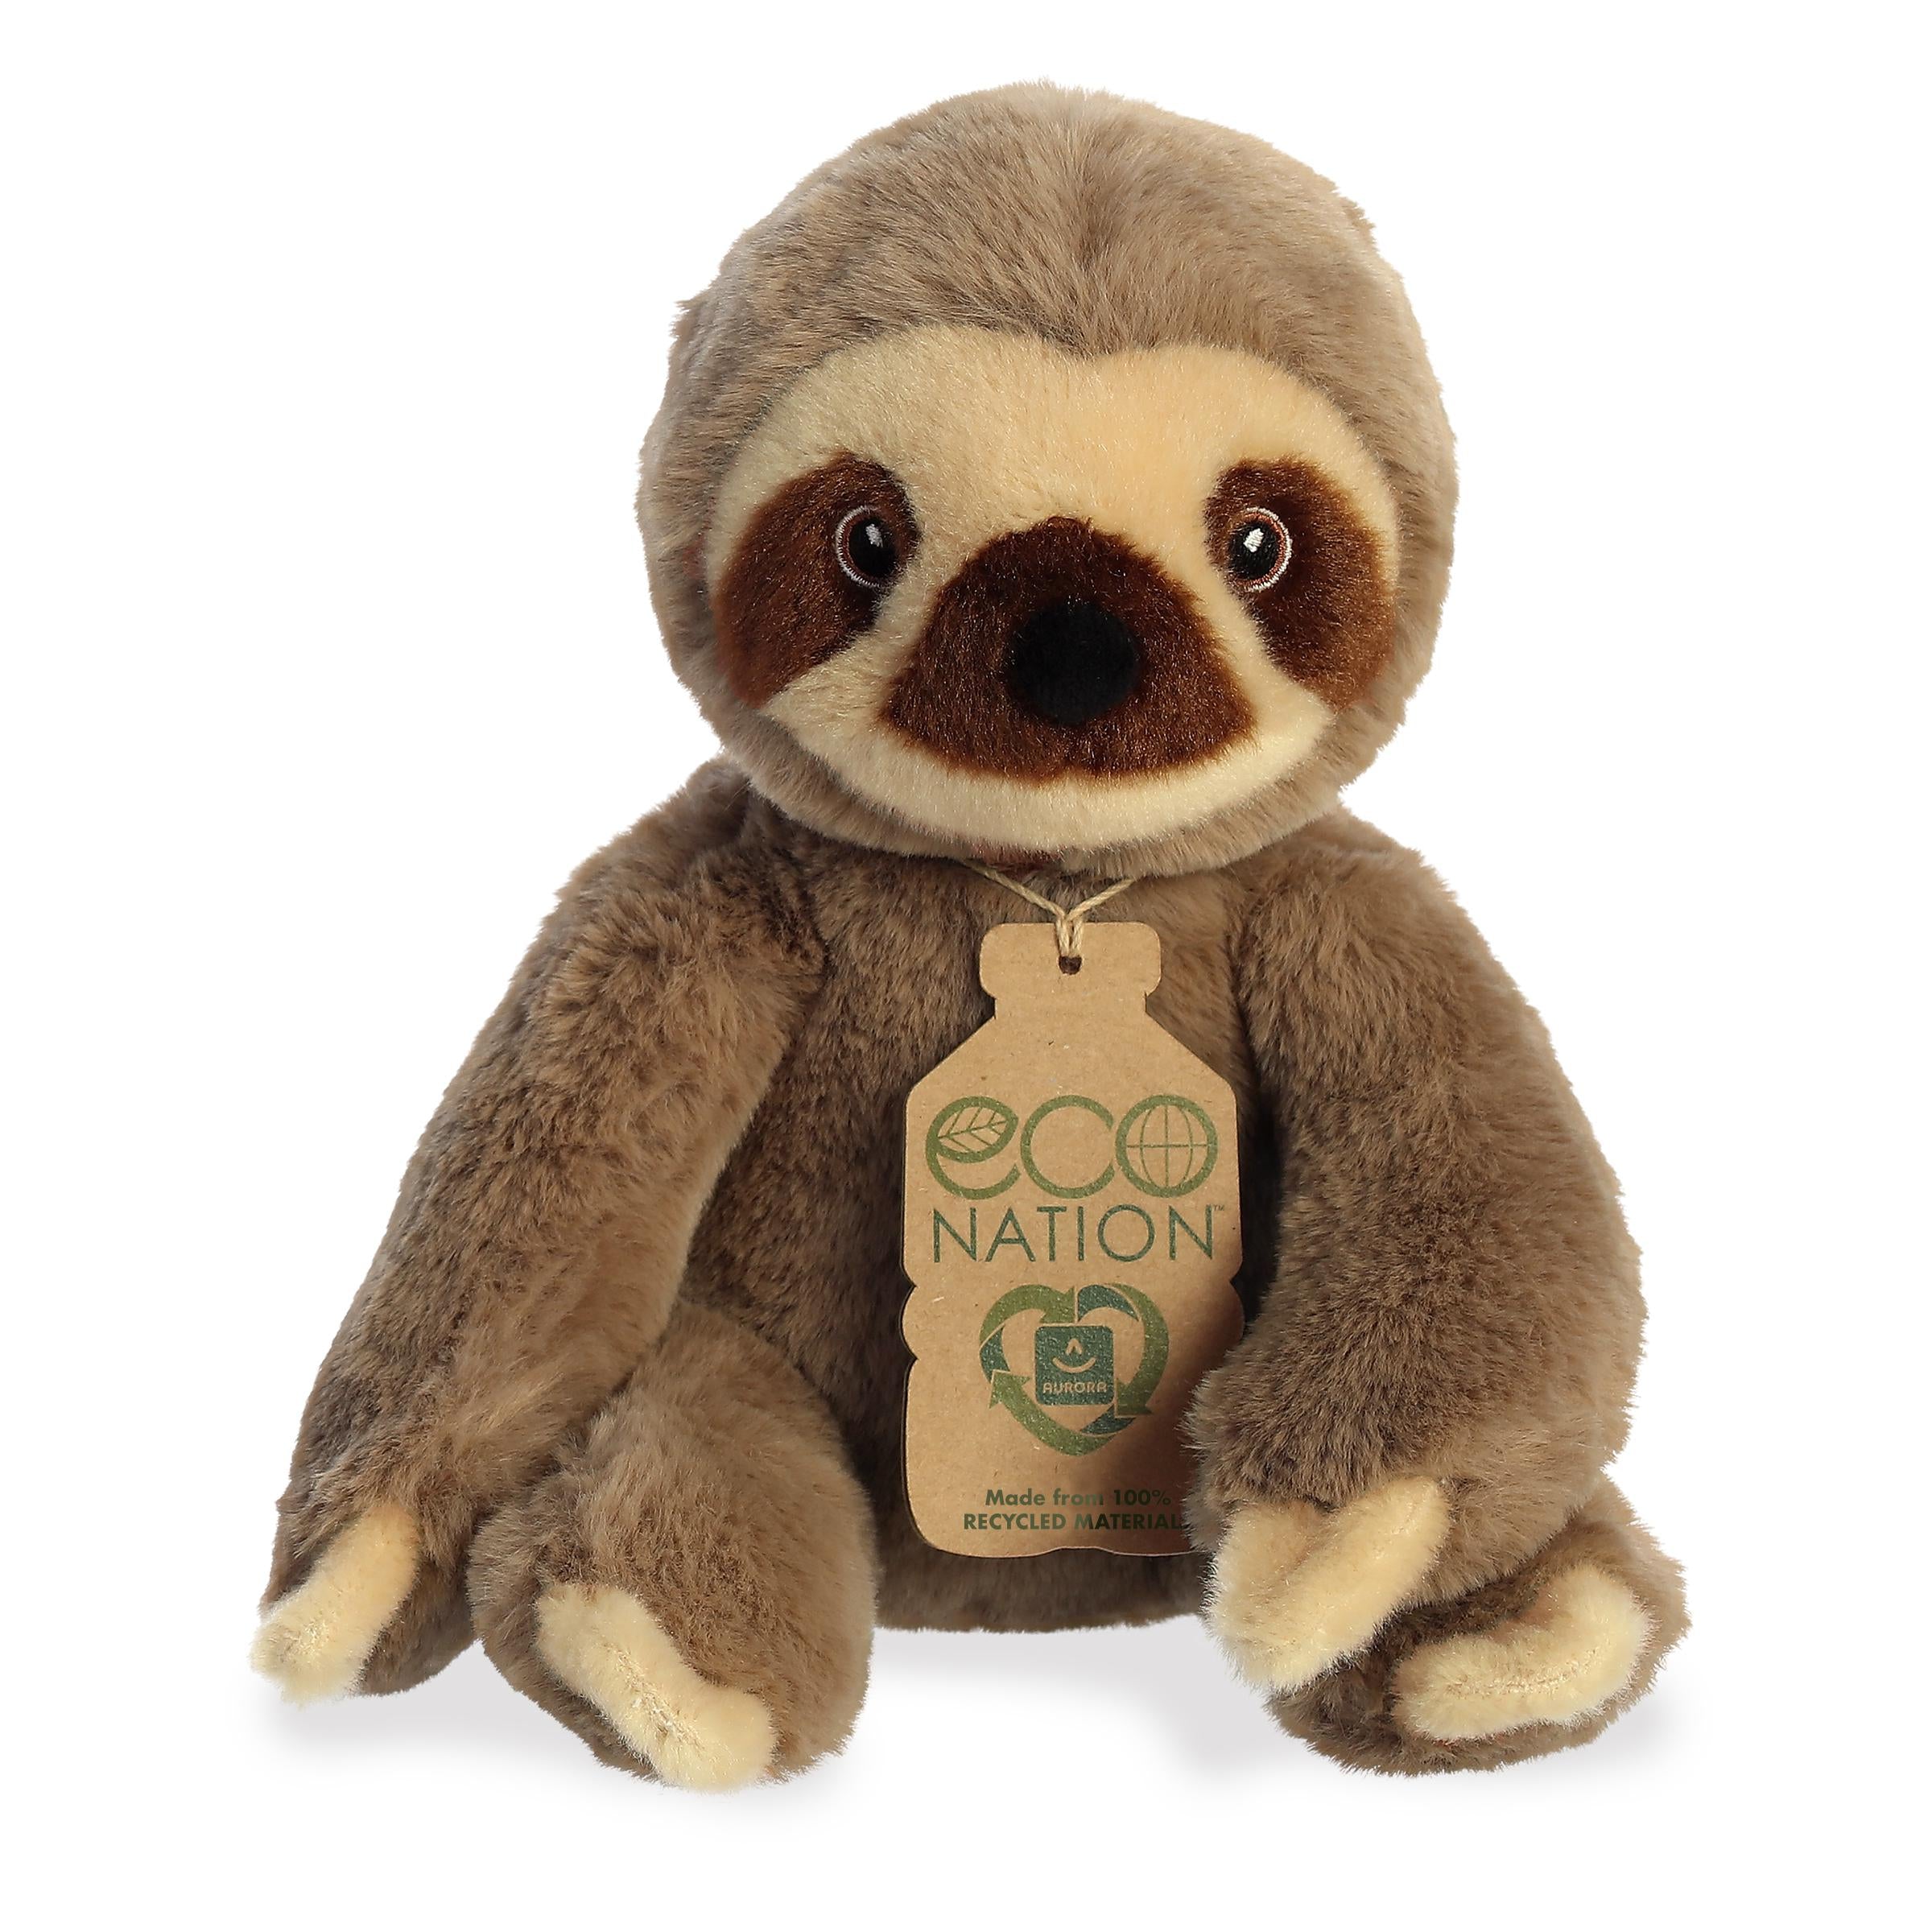 A friendly sloth plush with a rich-brown coat, gentle embroidered eyes, and an eco-nation tag around its neck